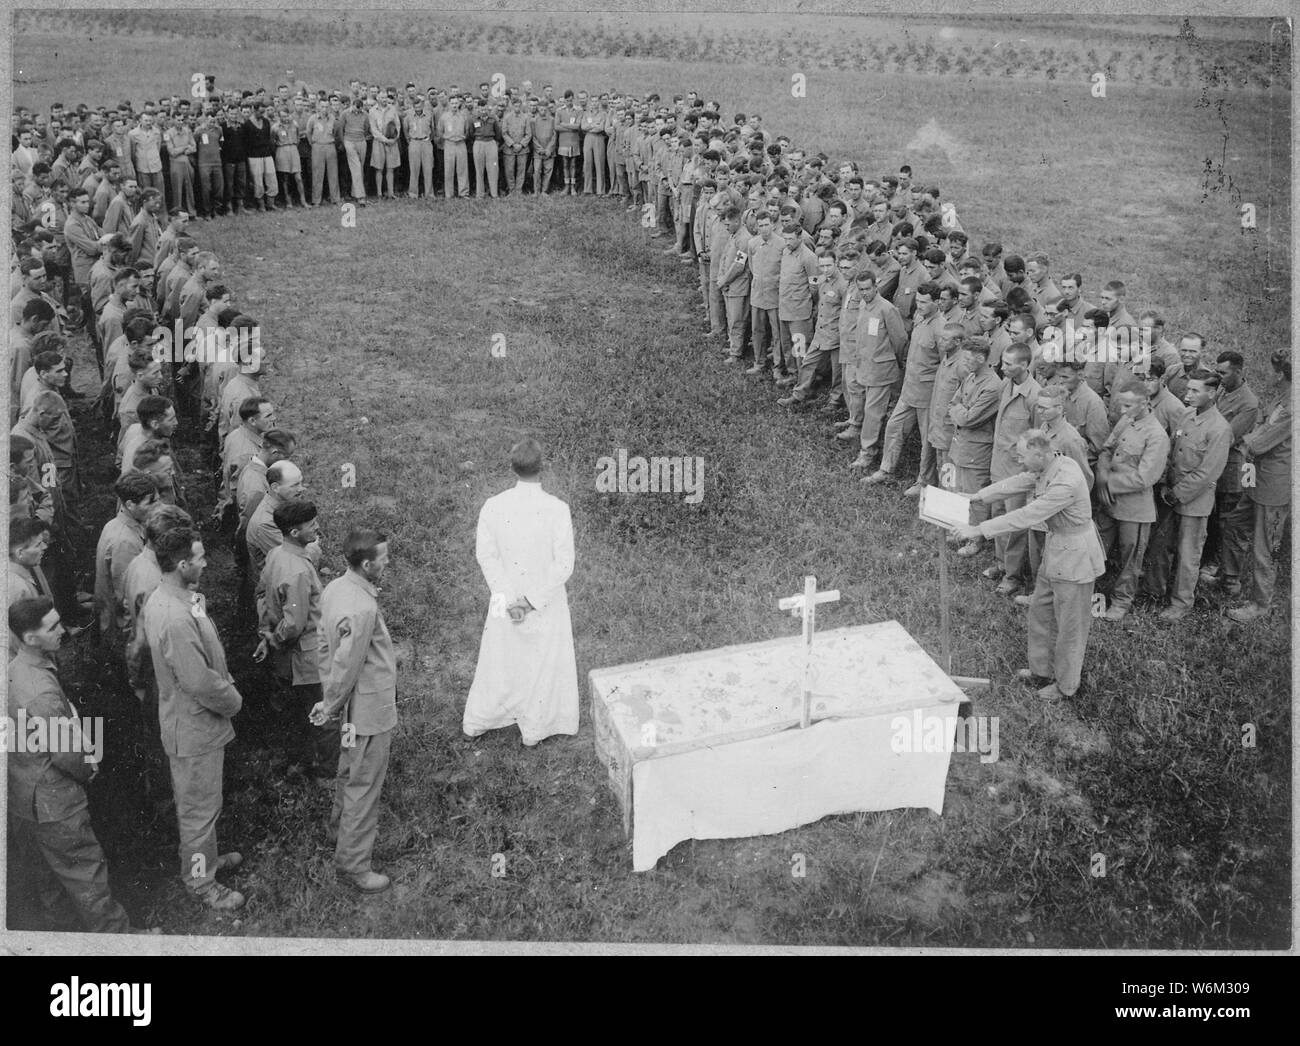 Service for deceased souls, 3rd Branch Camp. American prisoners of war at Airyokei, Takao Province, Formosa, ca. 1943-1944.; General notes:  Use War and Conflict Number 1302 when ordering a reproduction or requesting information about this image. Stock Photo